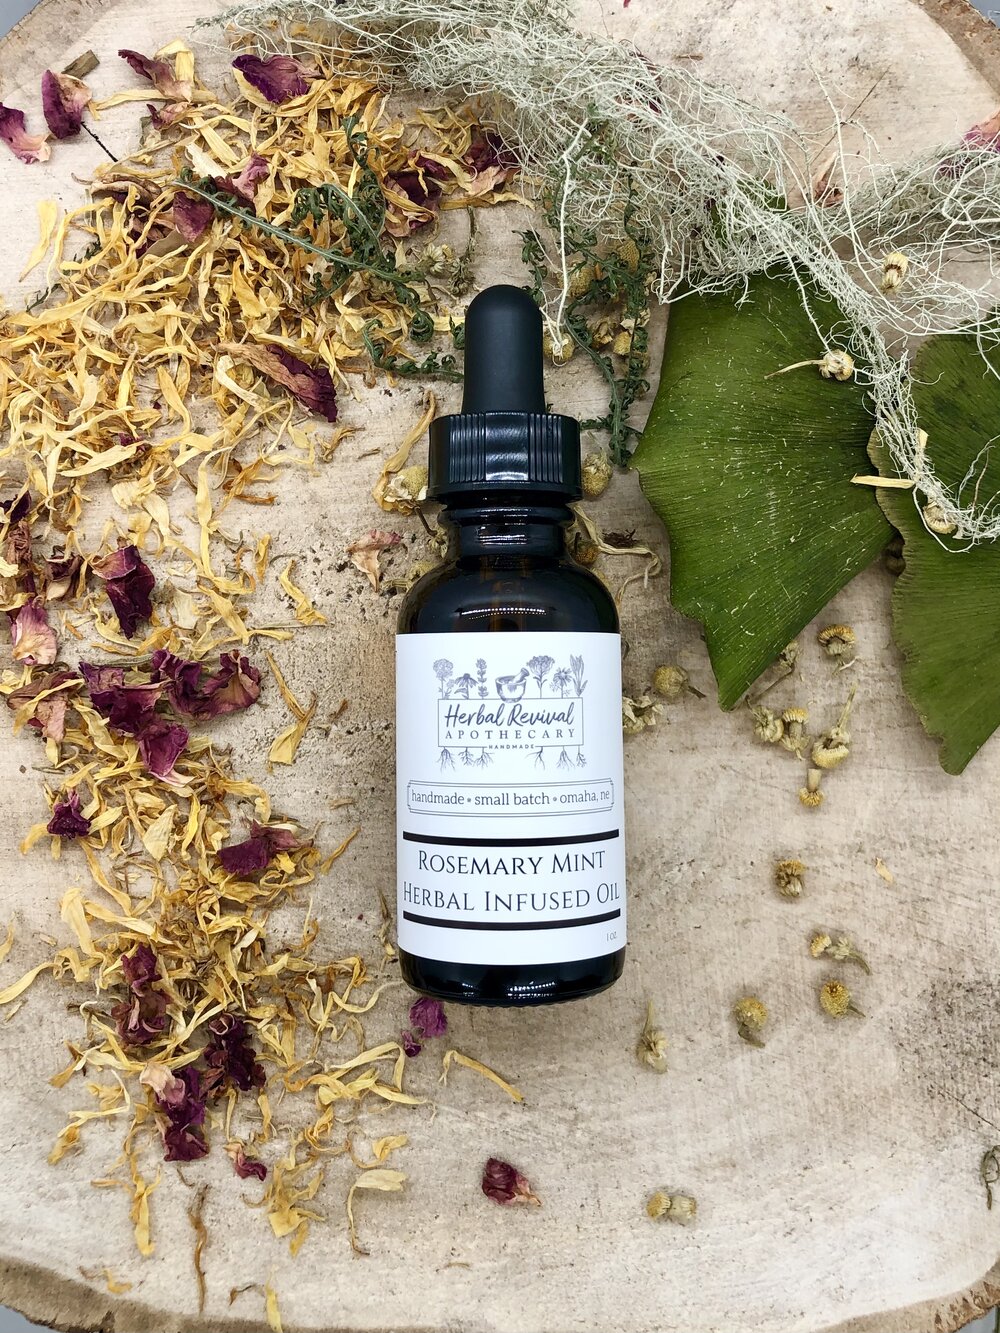 Rosemary Mint — Herbal Revival Apothecary